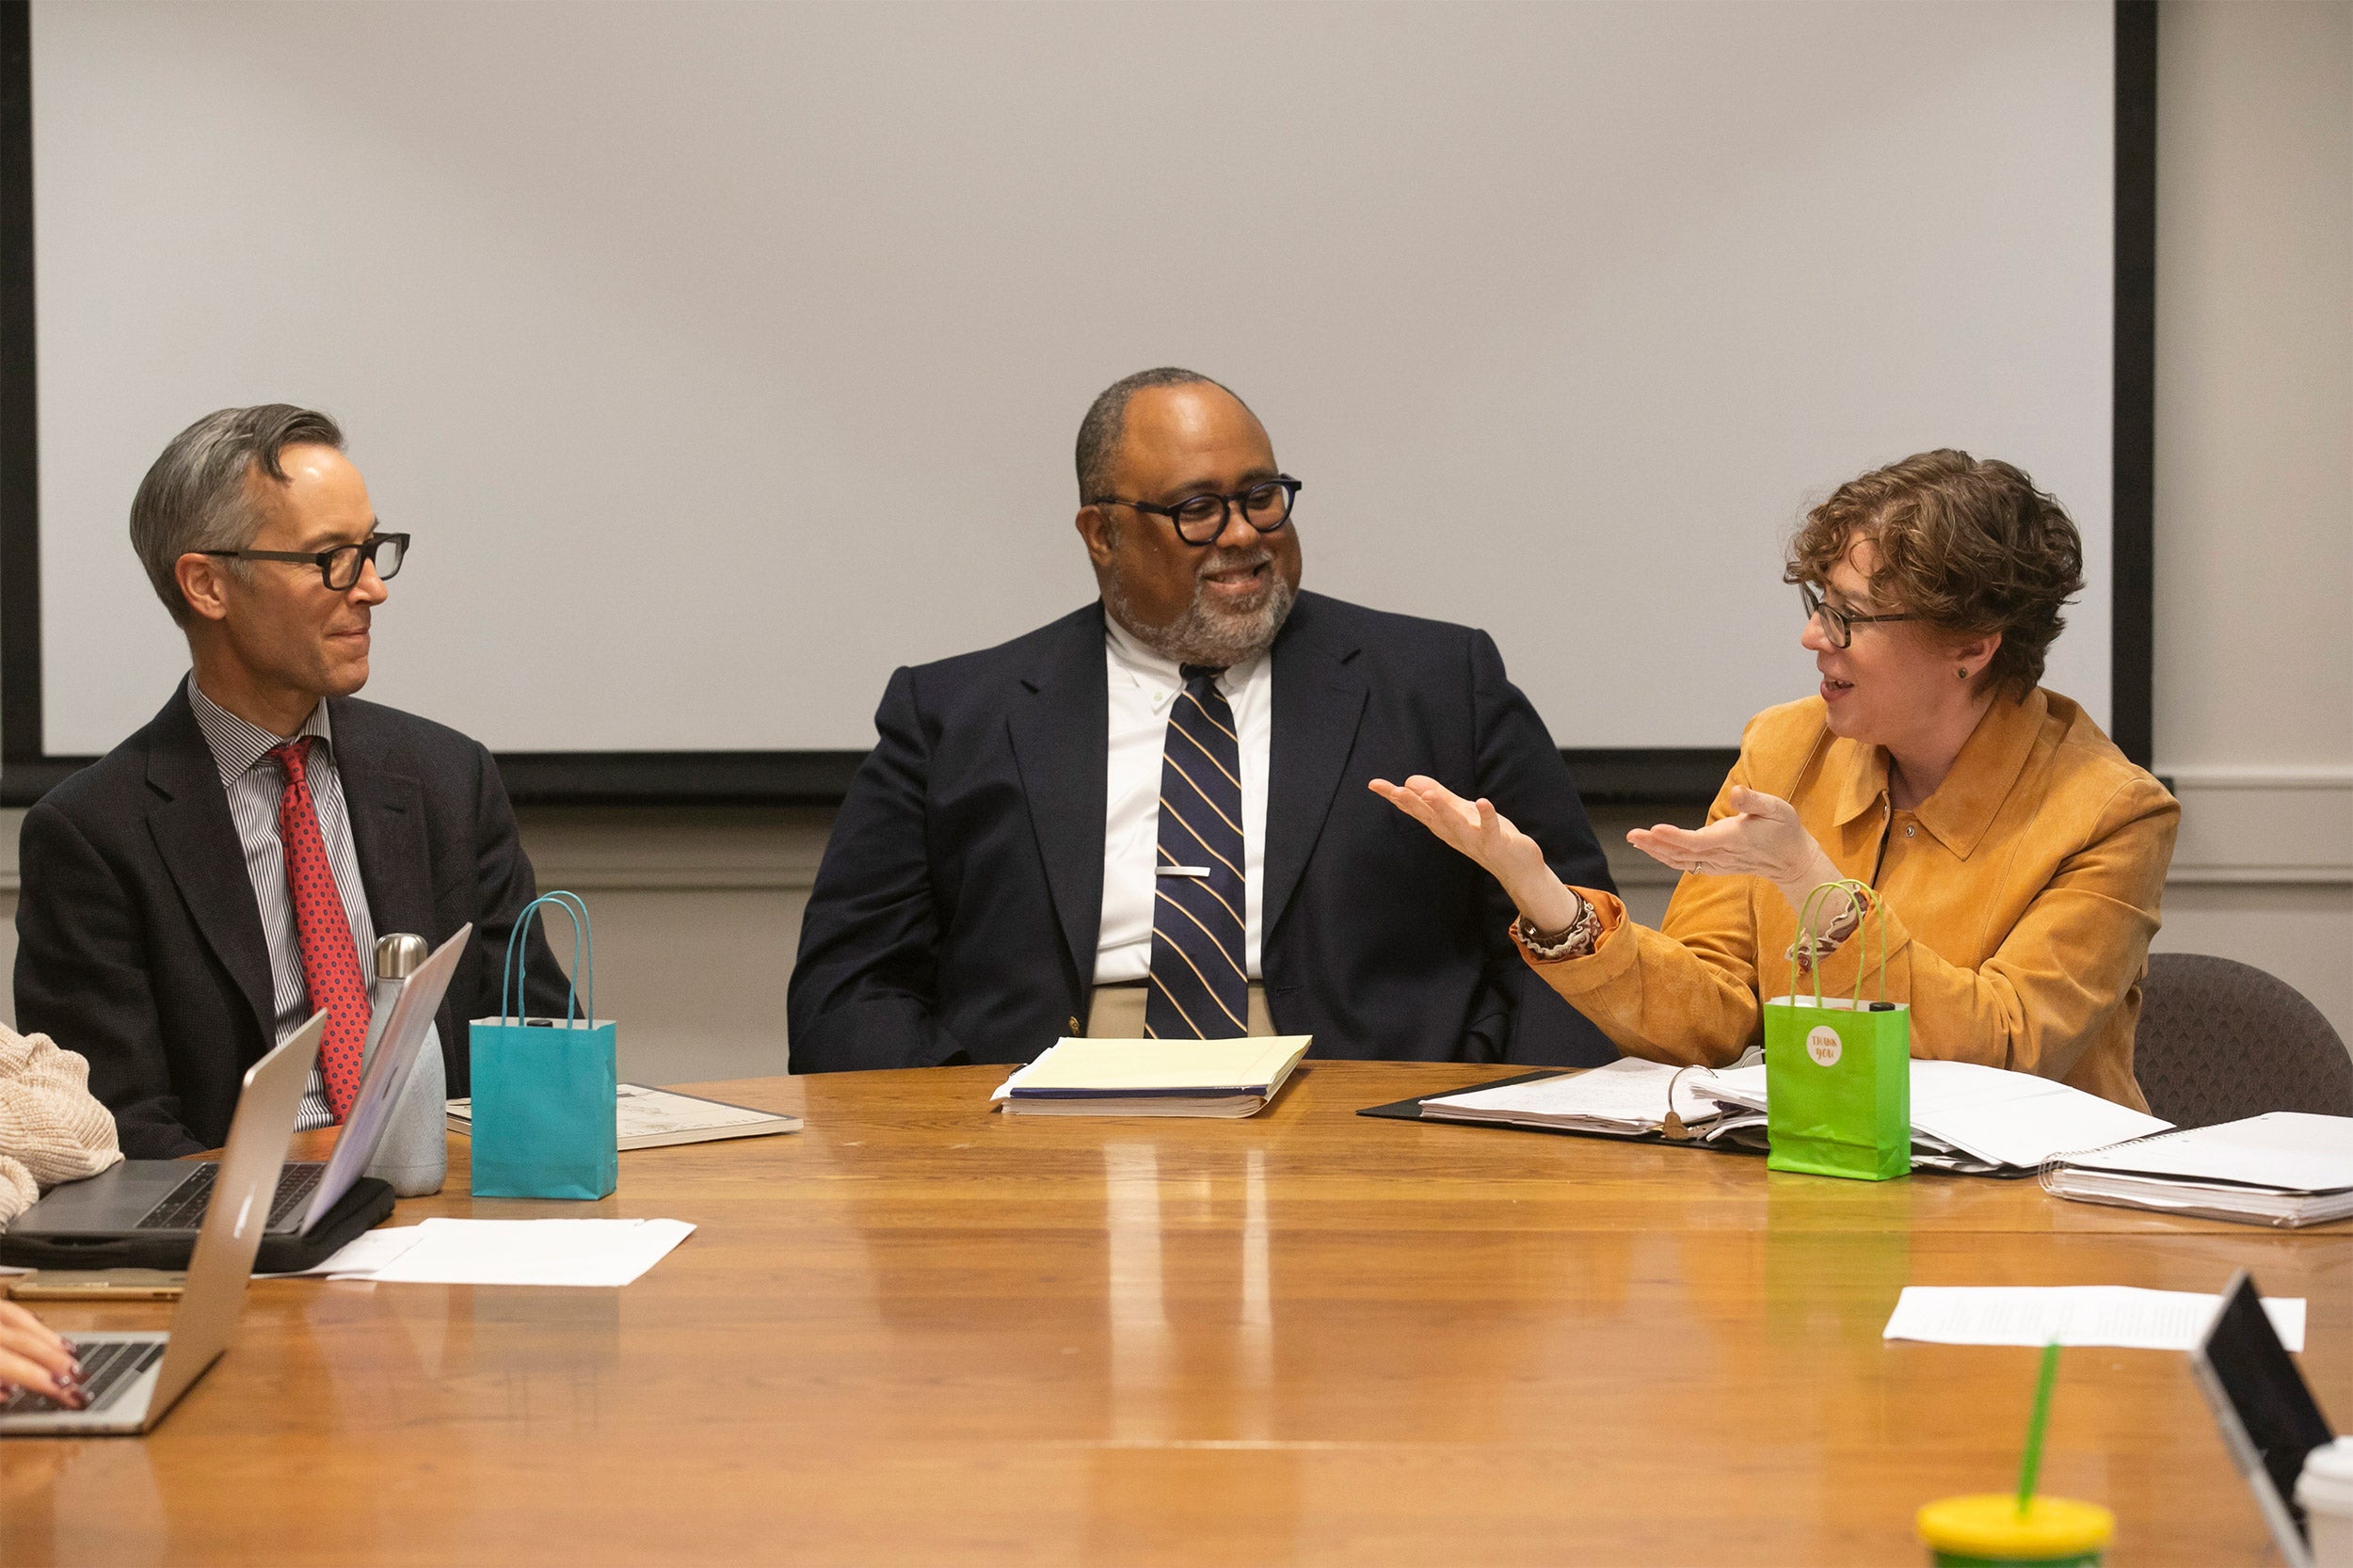 Professor Robin Bernstein speaking with Deans Robin Kelsey and Lawrence Bobo at a conference table.